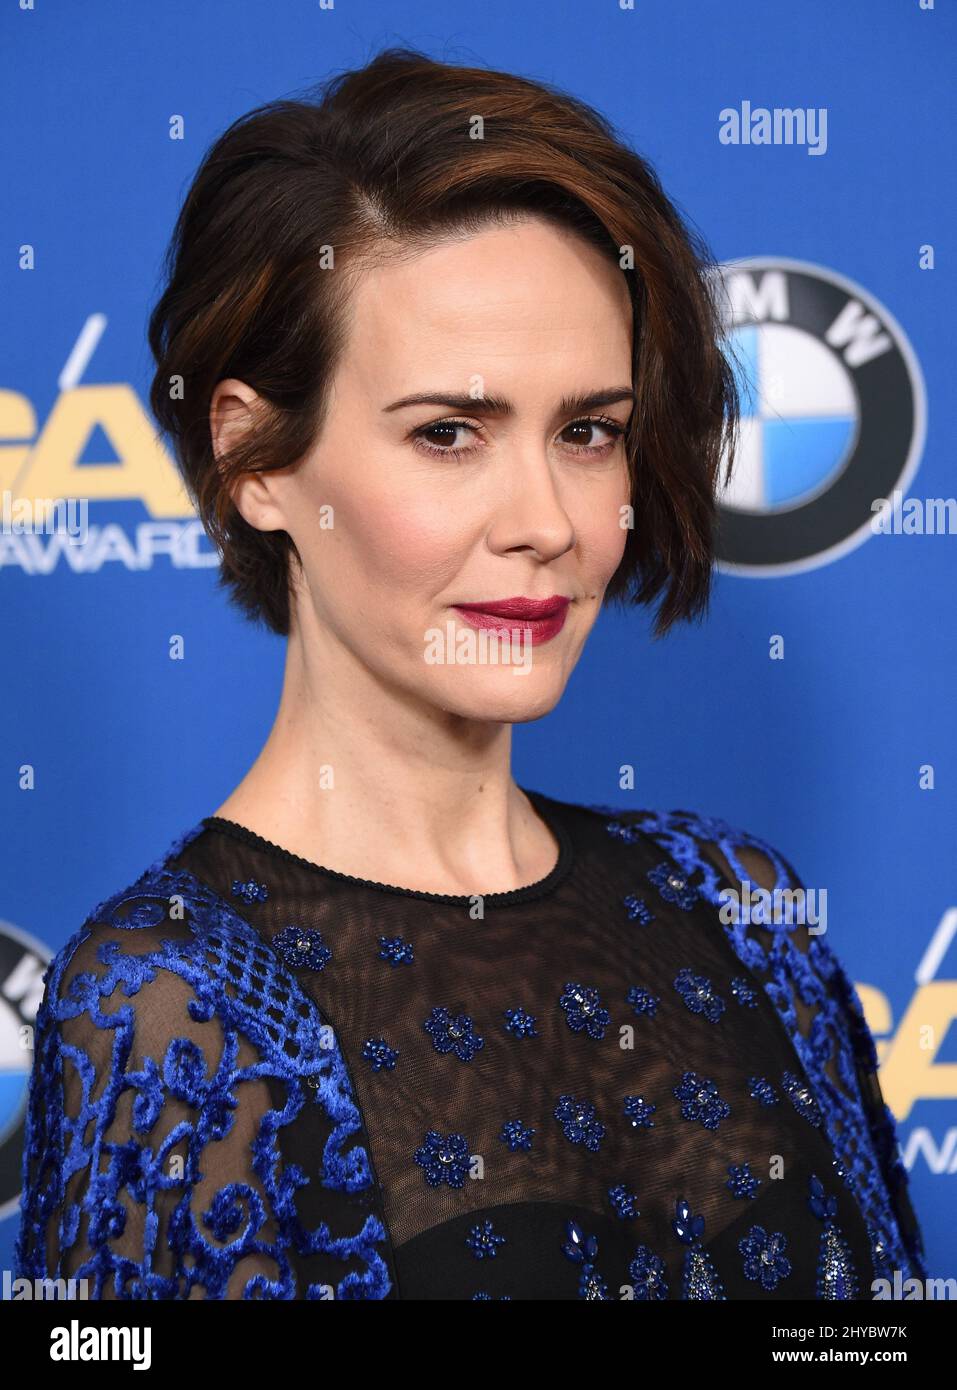 Sarah Paulson Arriving For The 69th Annual Directors Guild Of America Awards Held At The Beverly